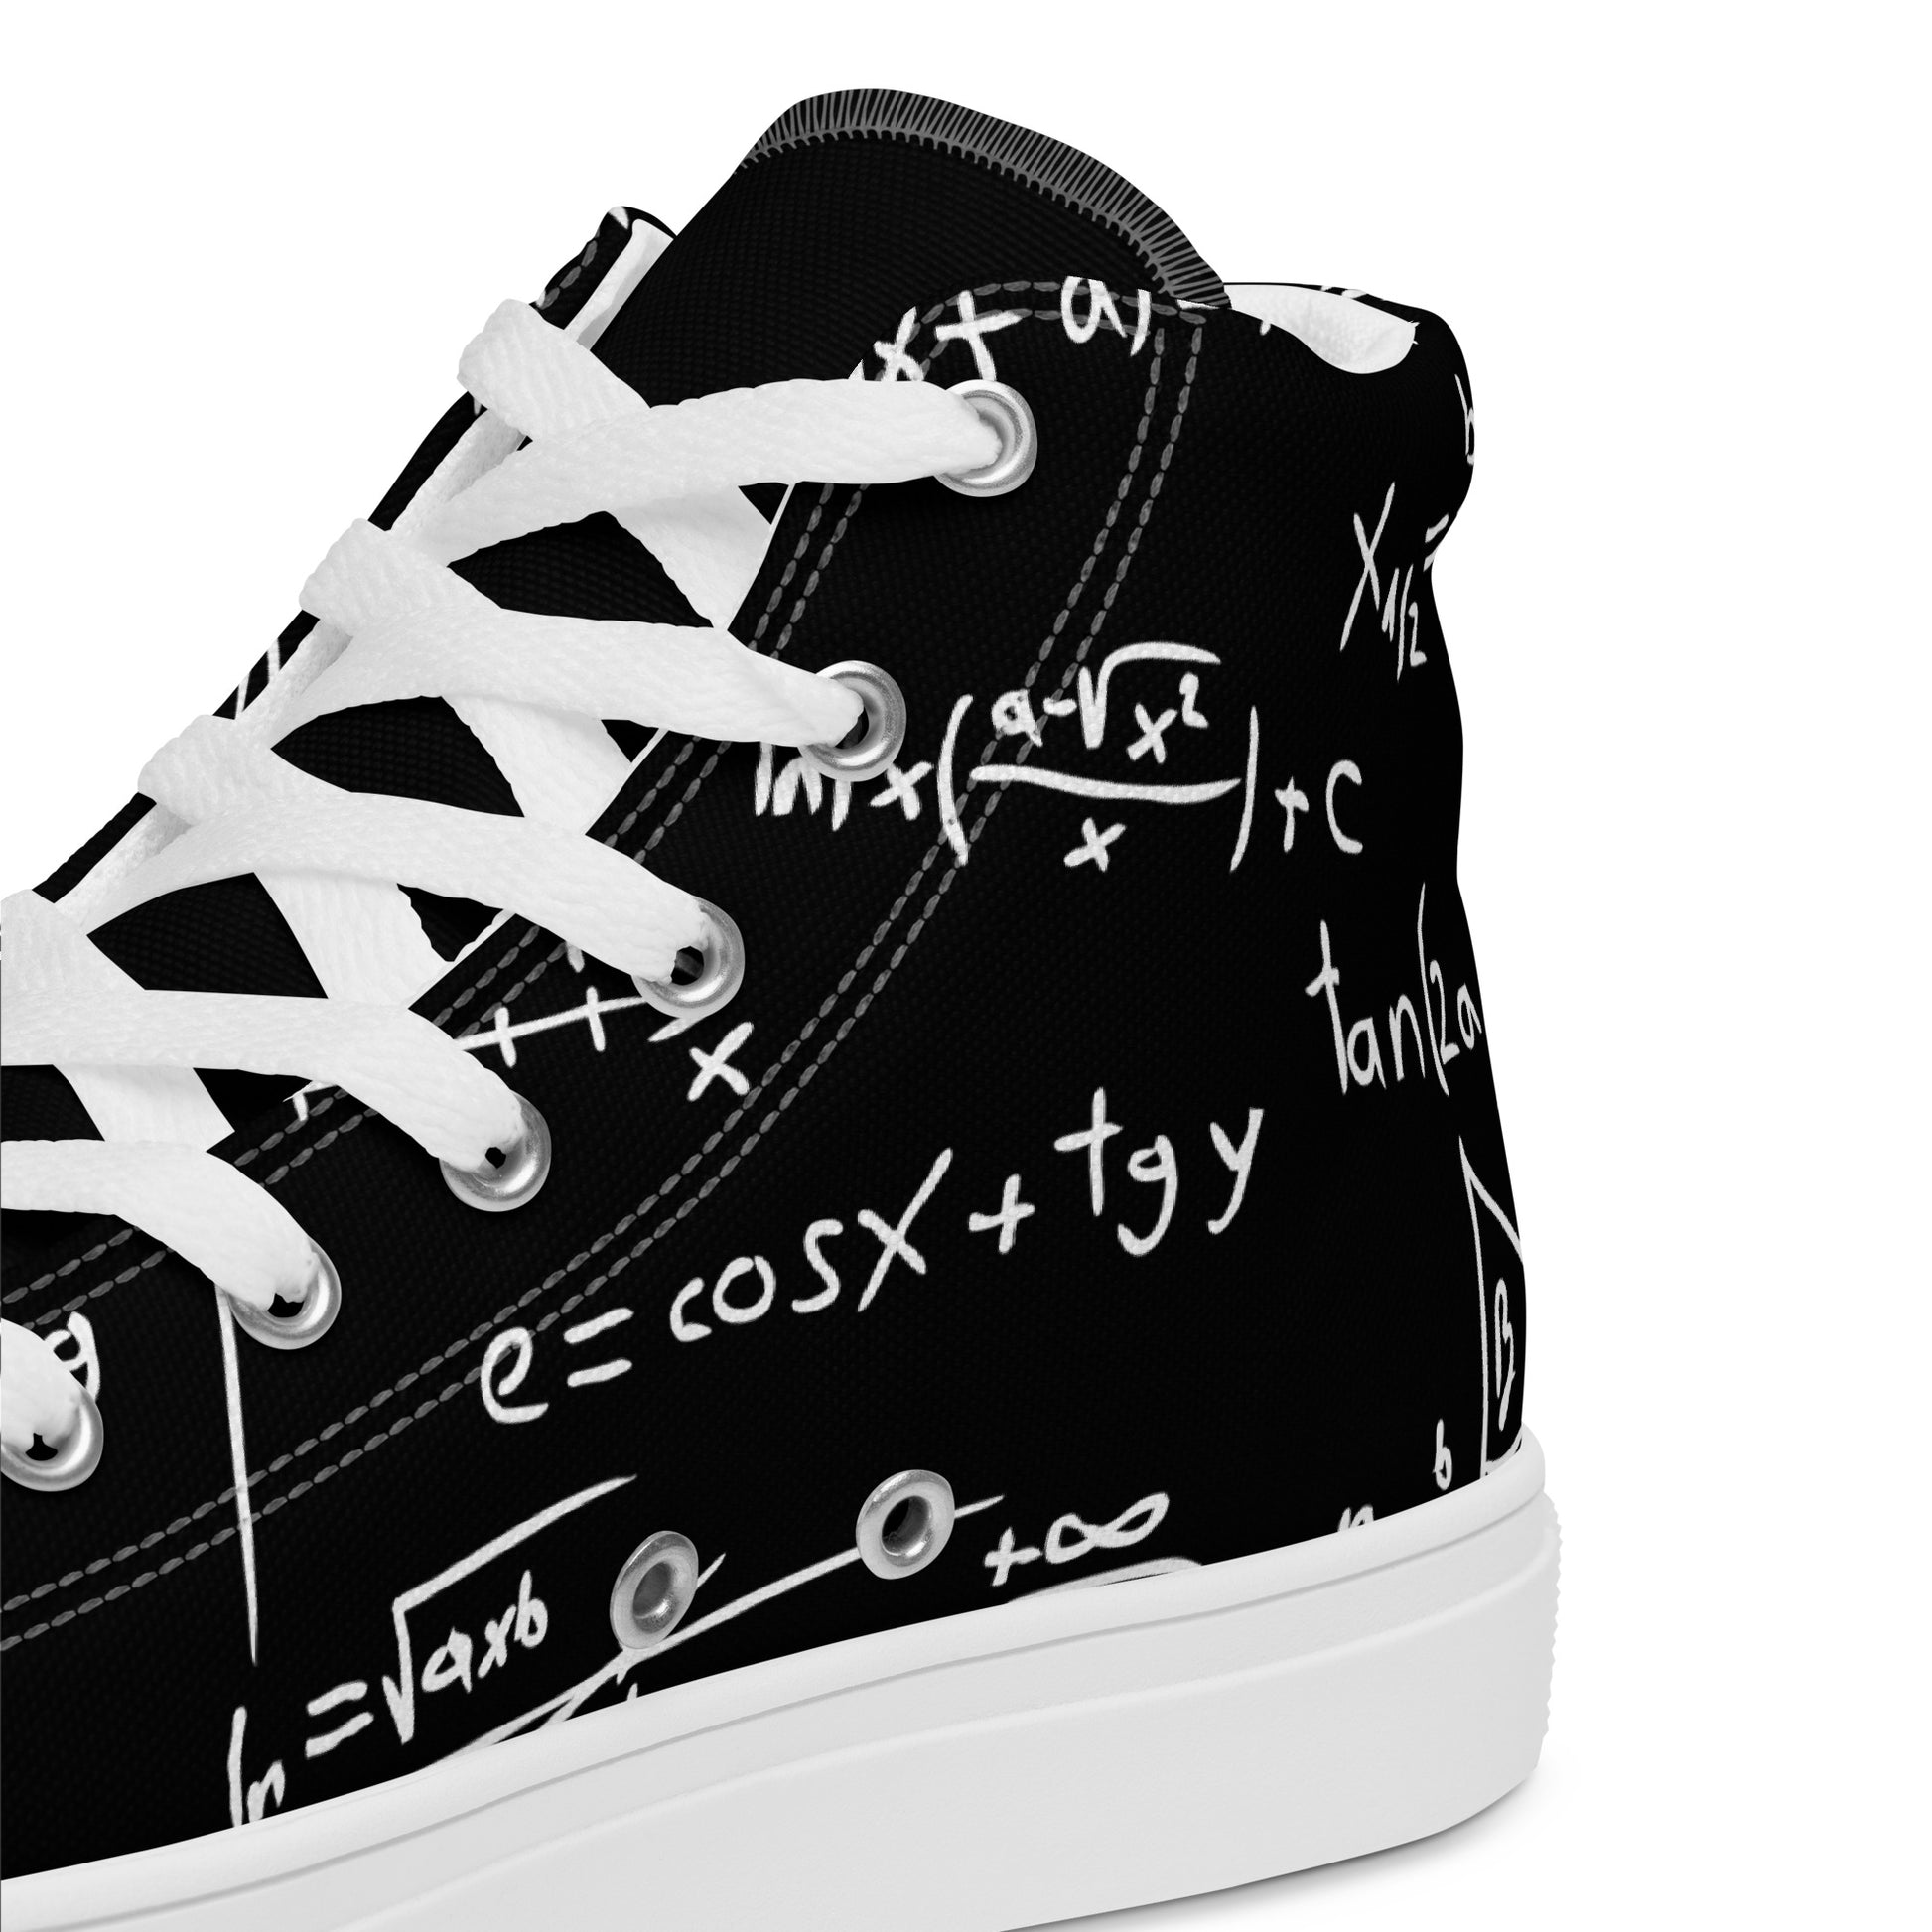 Equations - Women’s high top canvas shoes Womens High Top Shoes Outside Australia